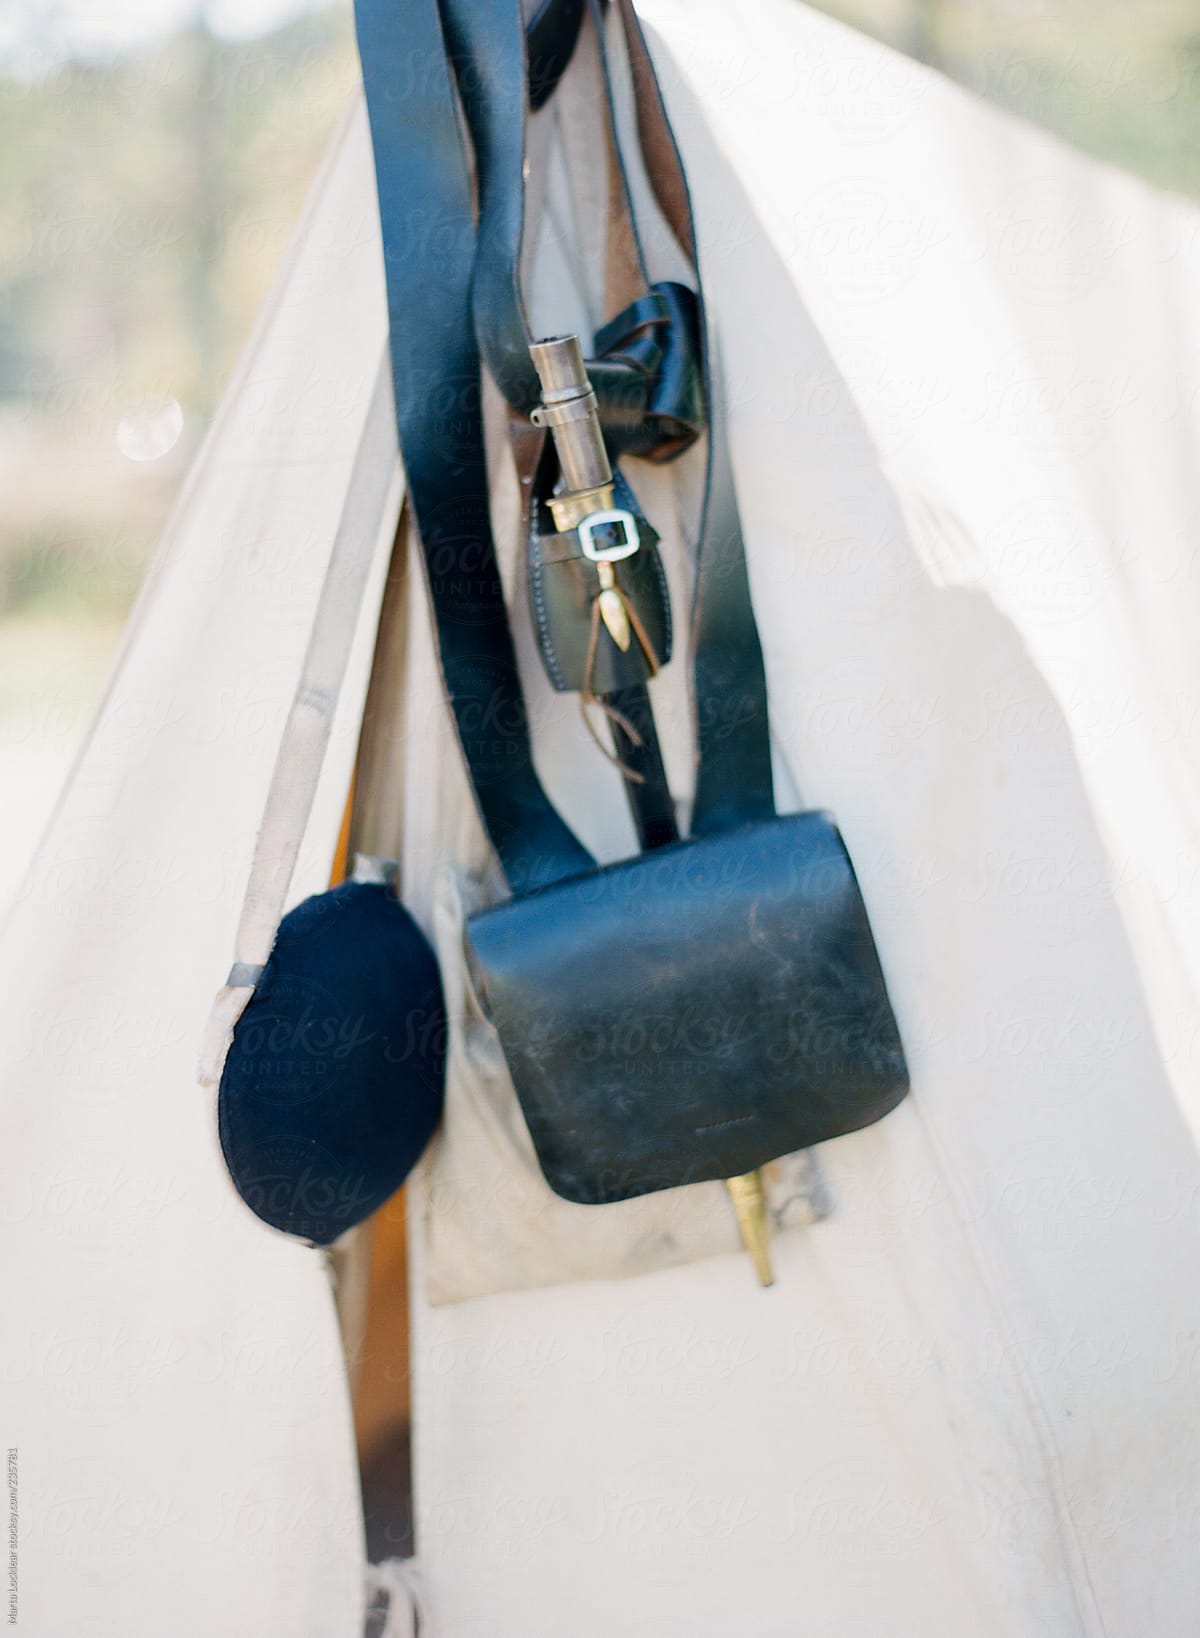 Old war camping gear hanging from a white tent